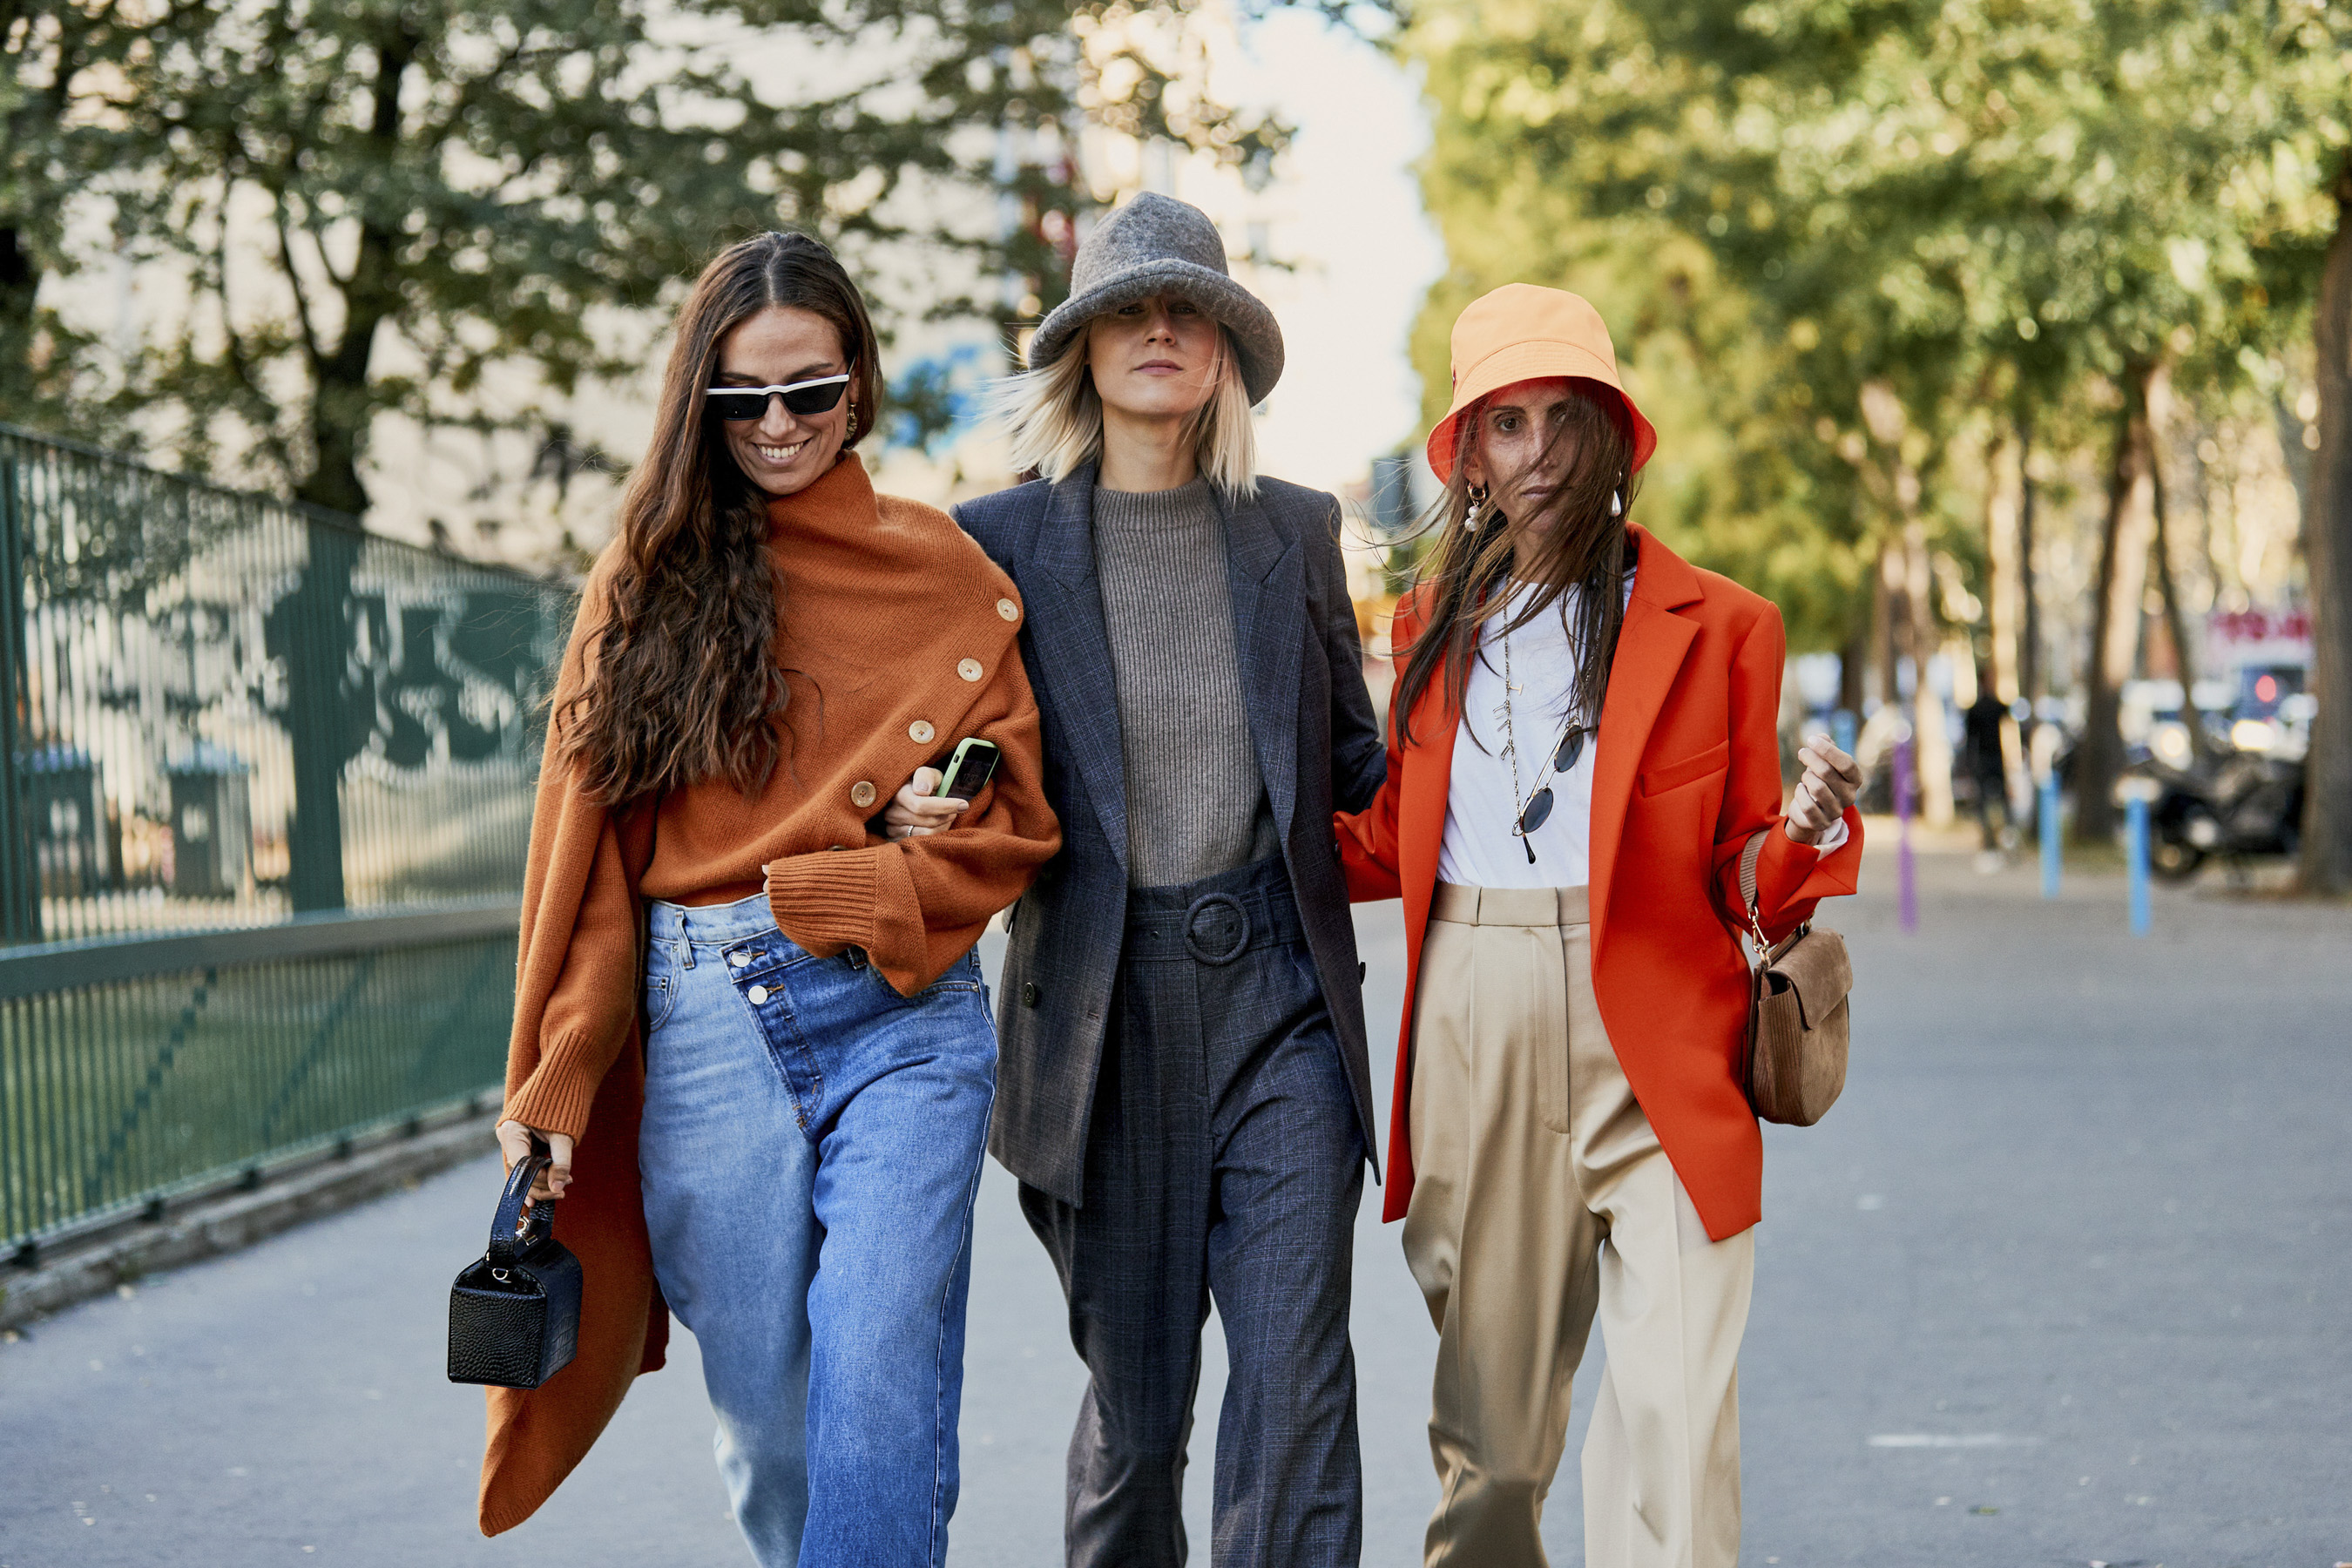 Paris Fashion Week Street Style Accessories Spring 2019 Day 2 - The ...